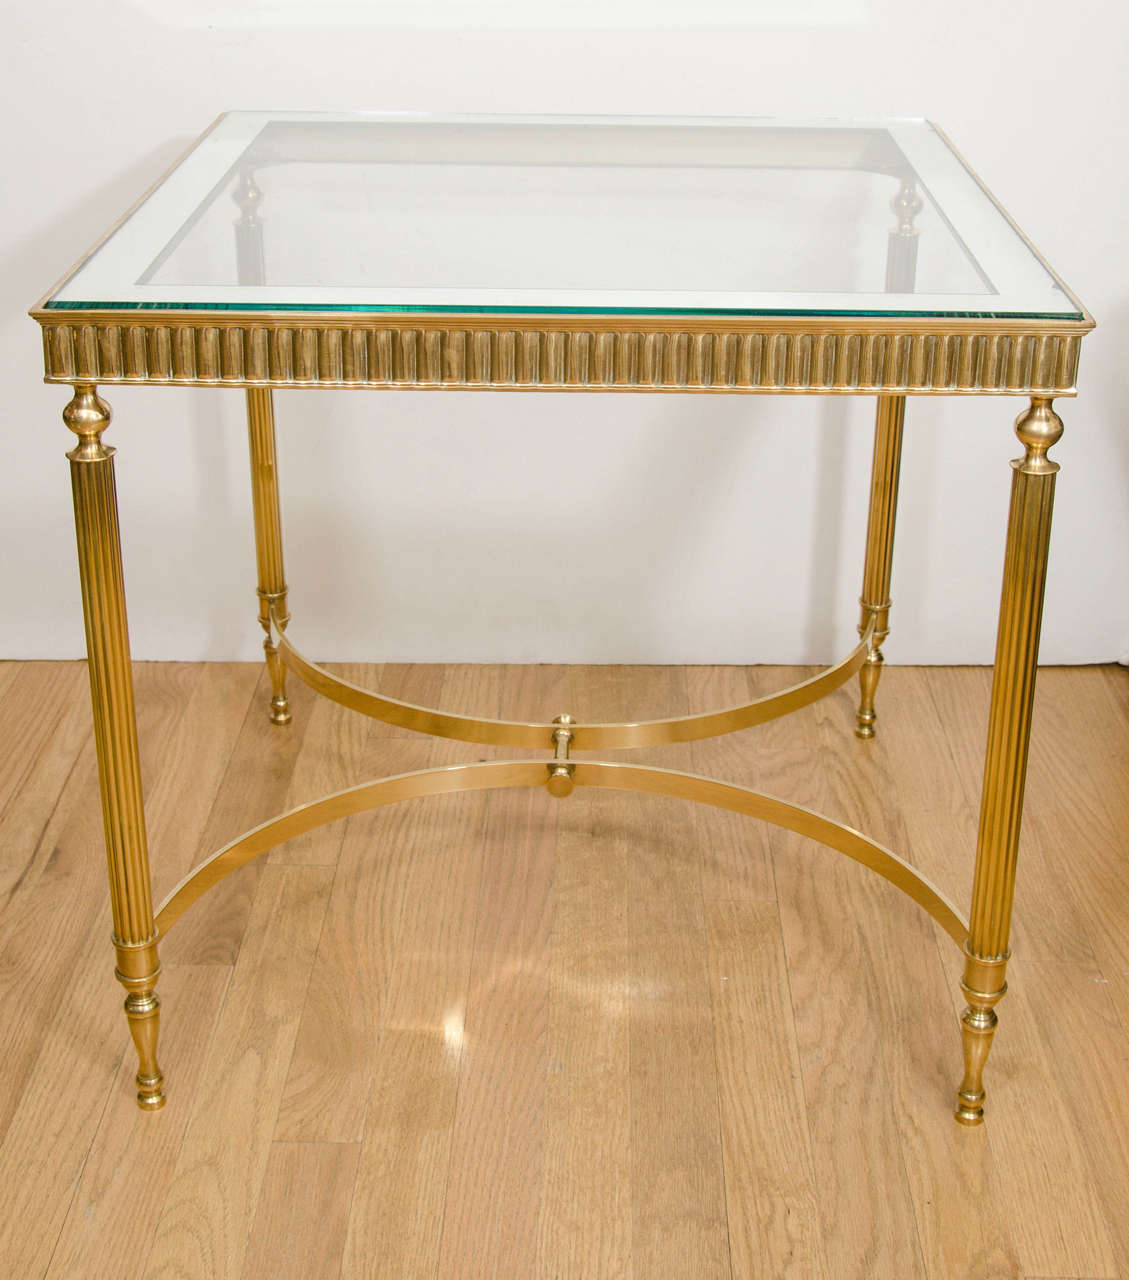 Pair of square brass decorative side tables with clear glass, mirror-trimmed top.